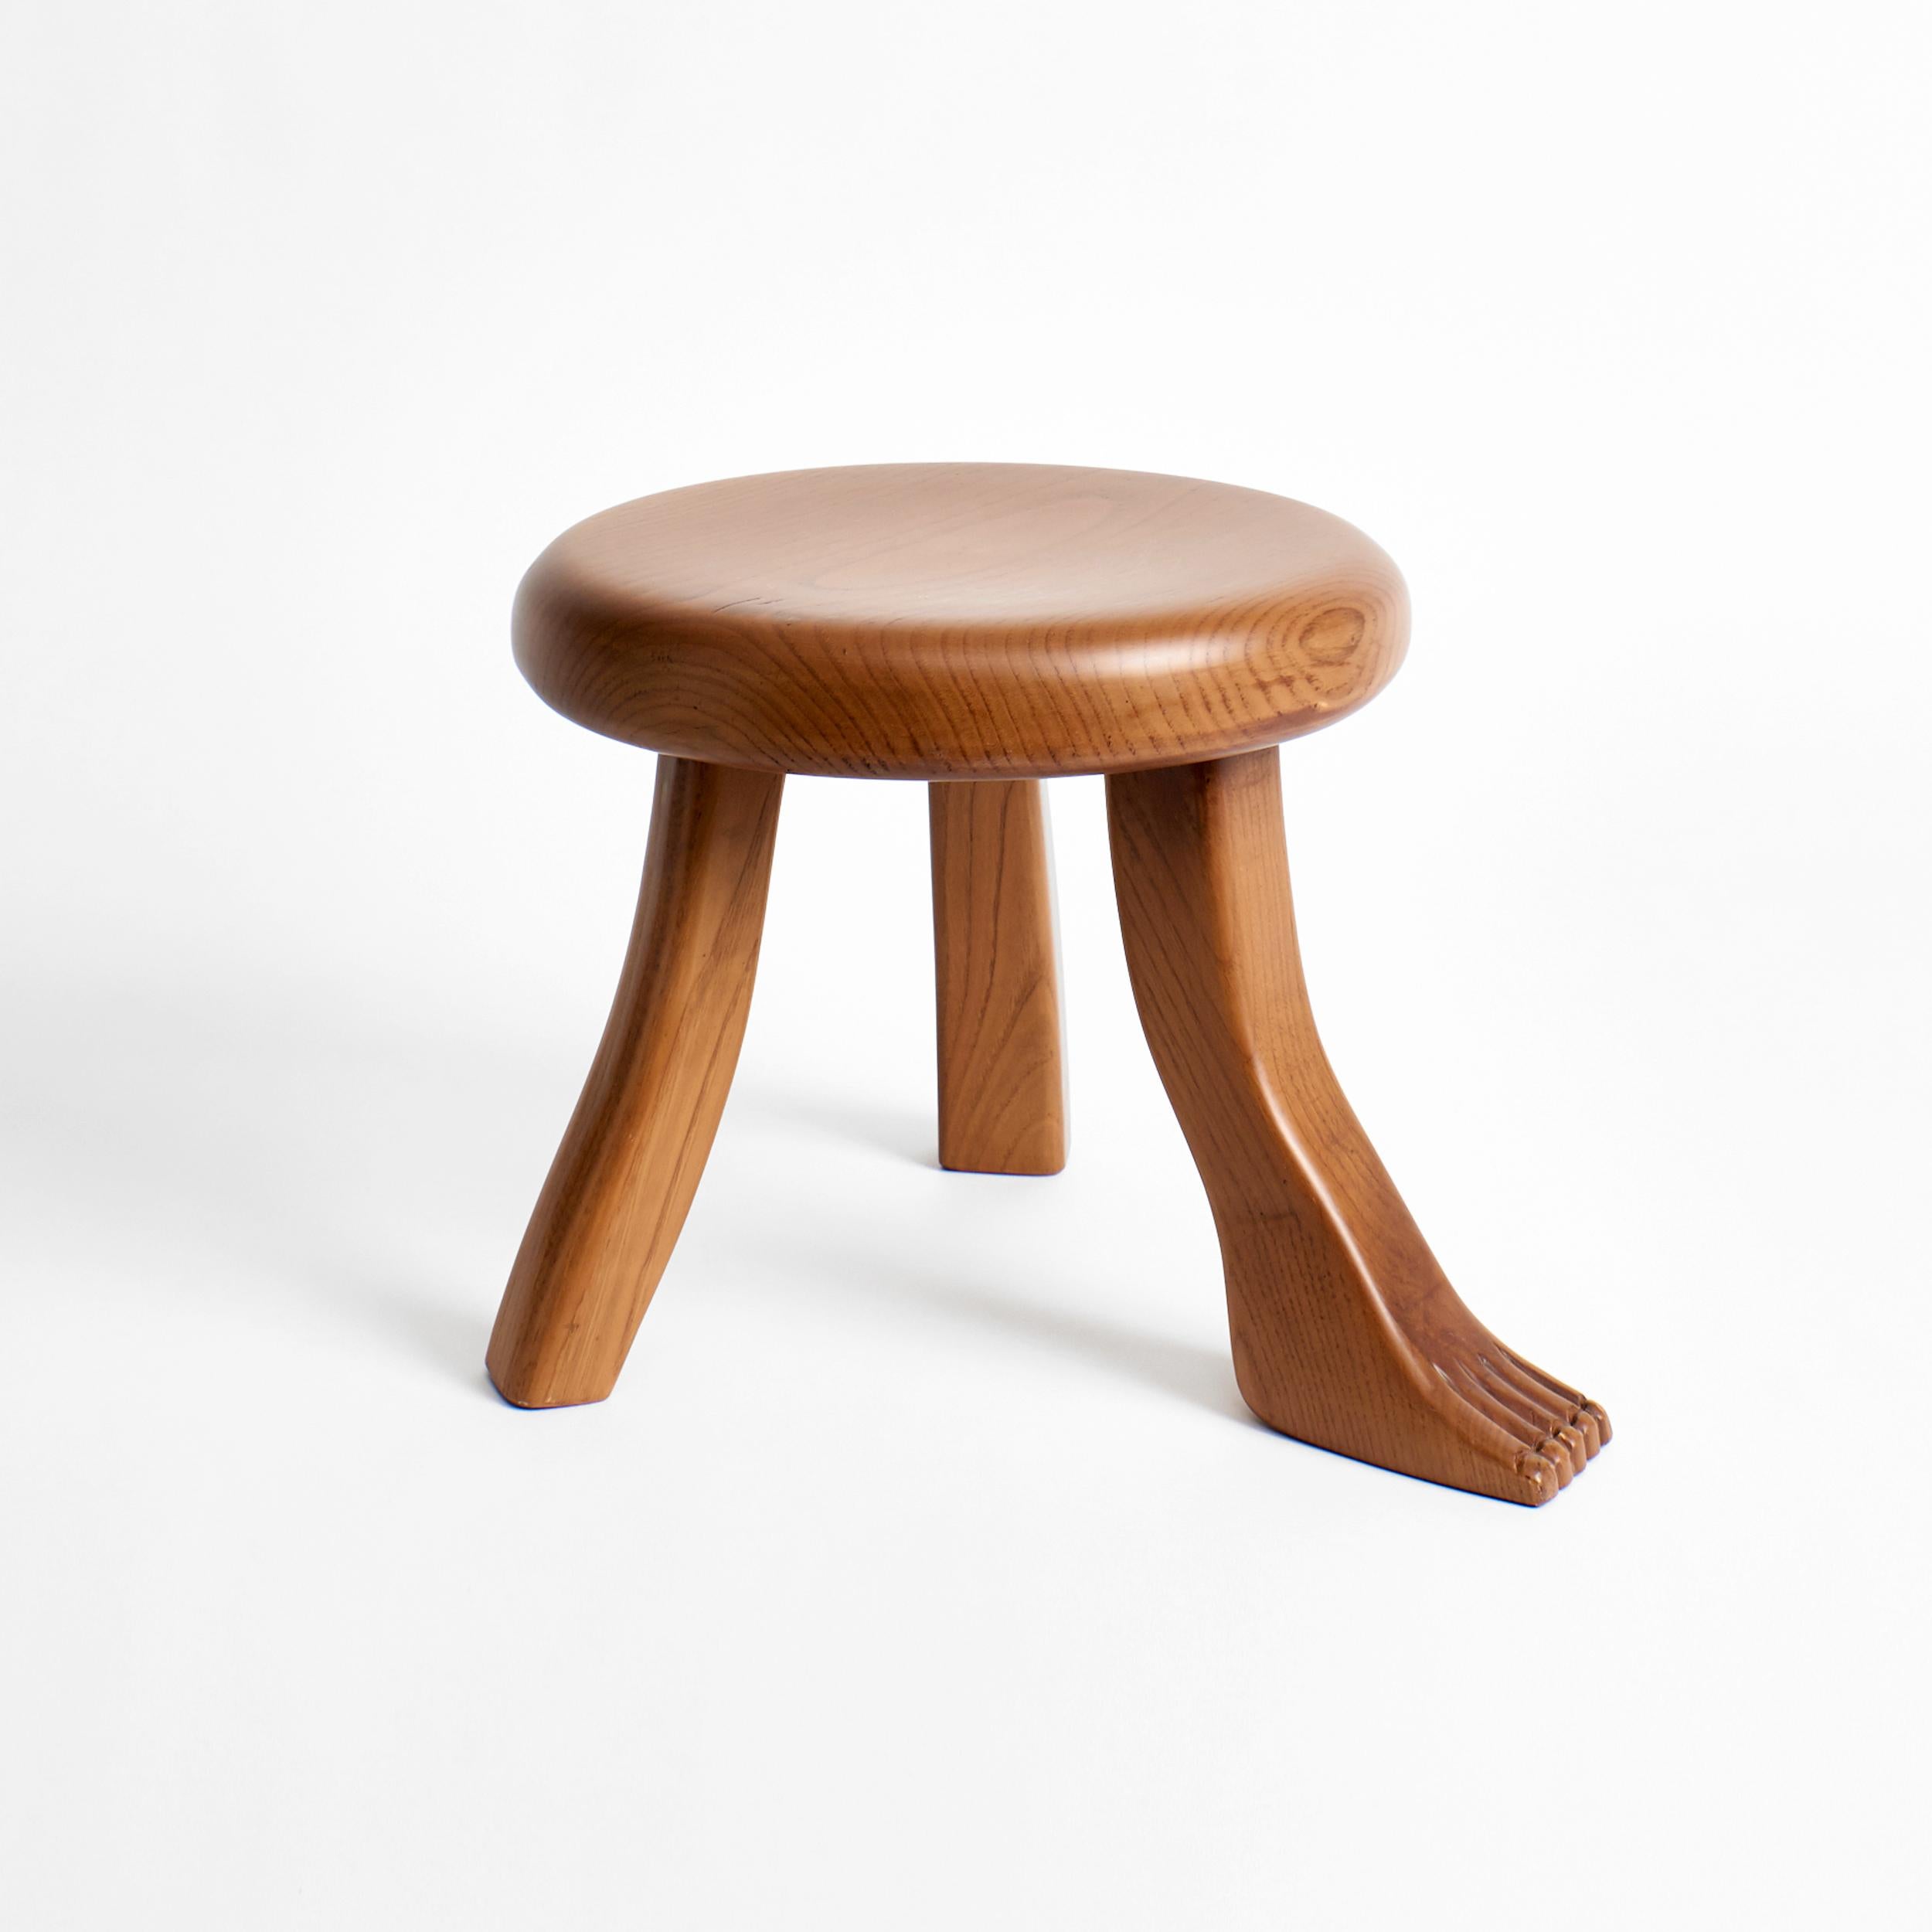 Contemporary Foot Stool by Project 213A